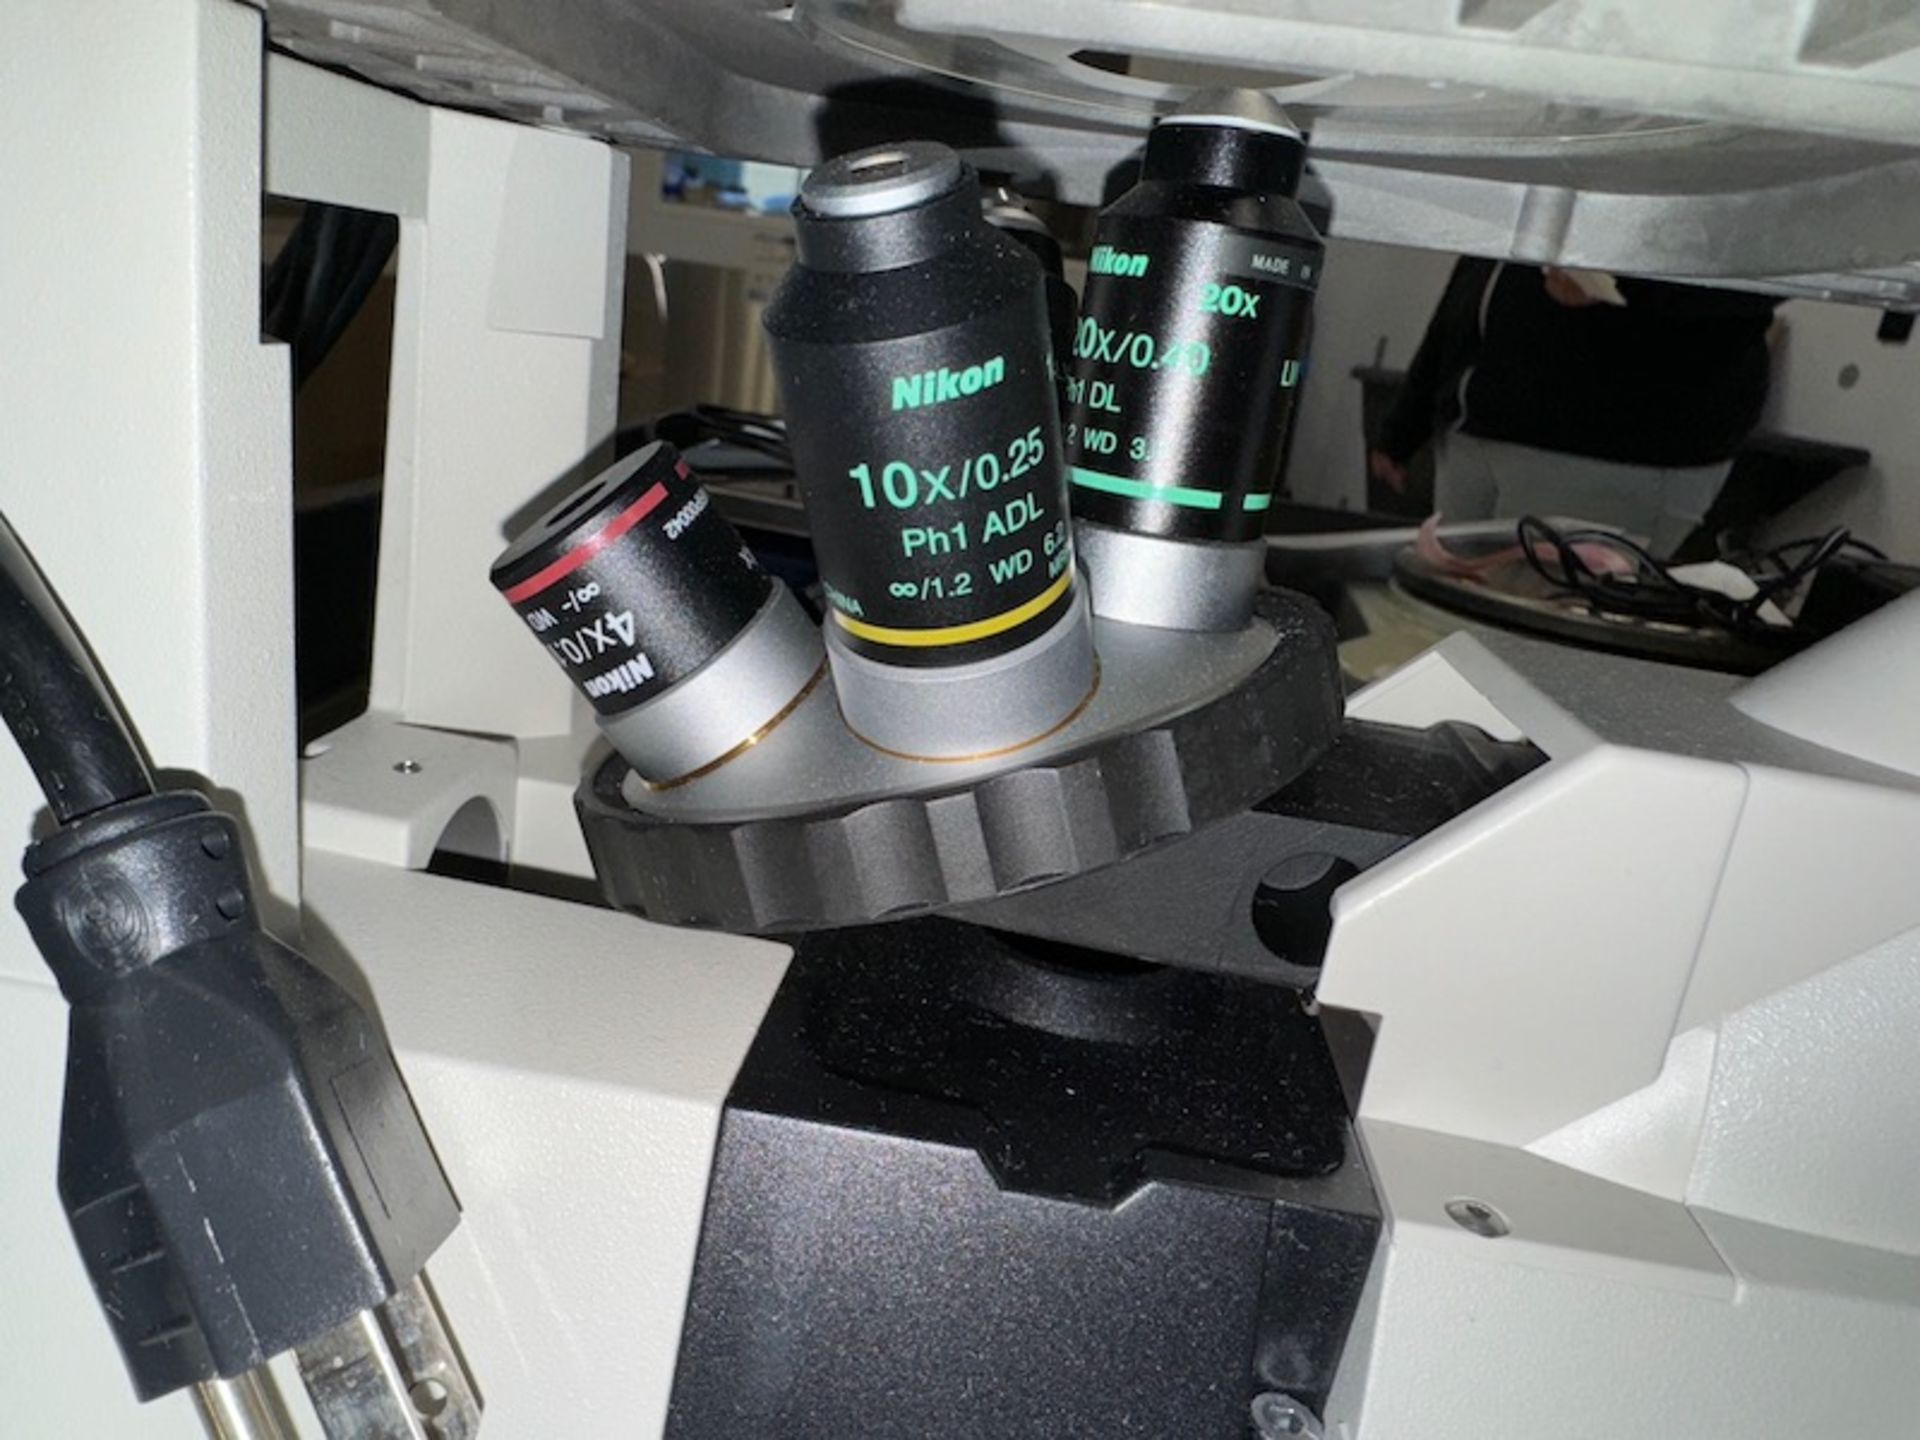 NIKON ECLIPSE INVERTED MICROSCOPE W / EYEPIECES & OBJECTIVE LENS - Image 12 of 14